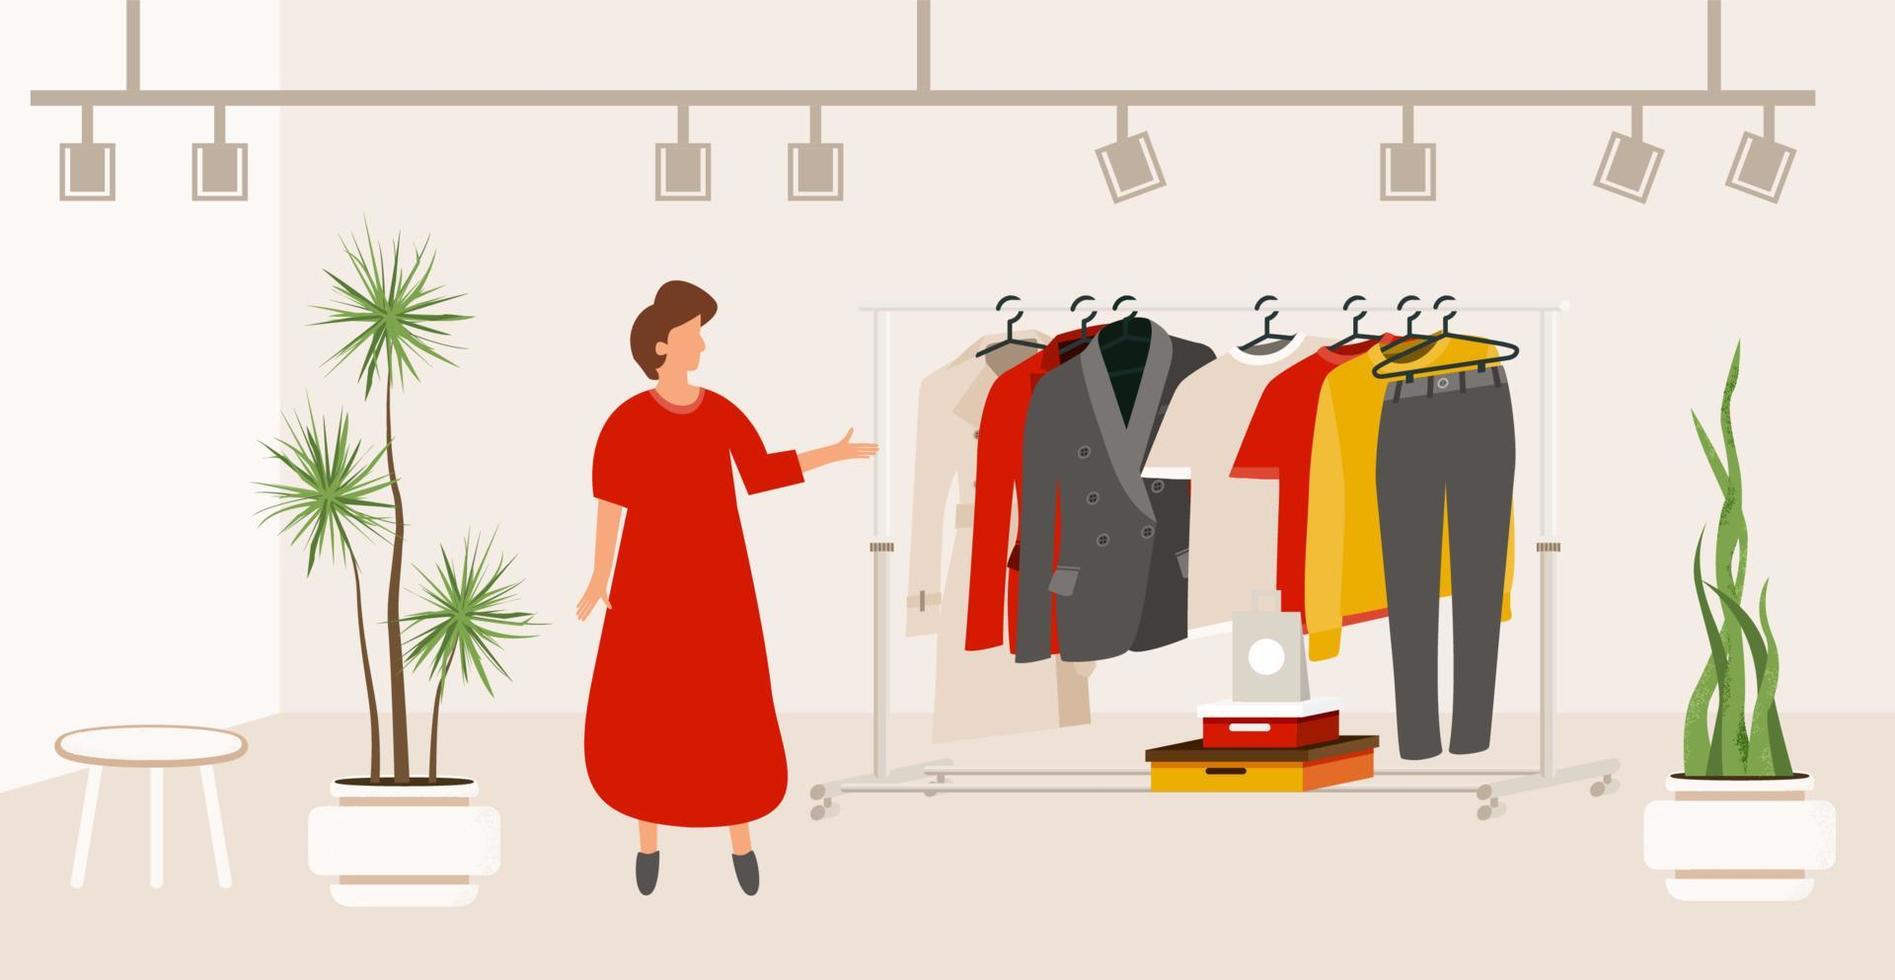 Modern Fashion Clothes Store. Boutique Interior with Clothers on Hangers. Showroom in Flat Design Style. vector